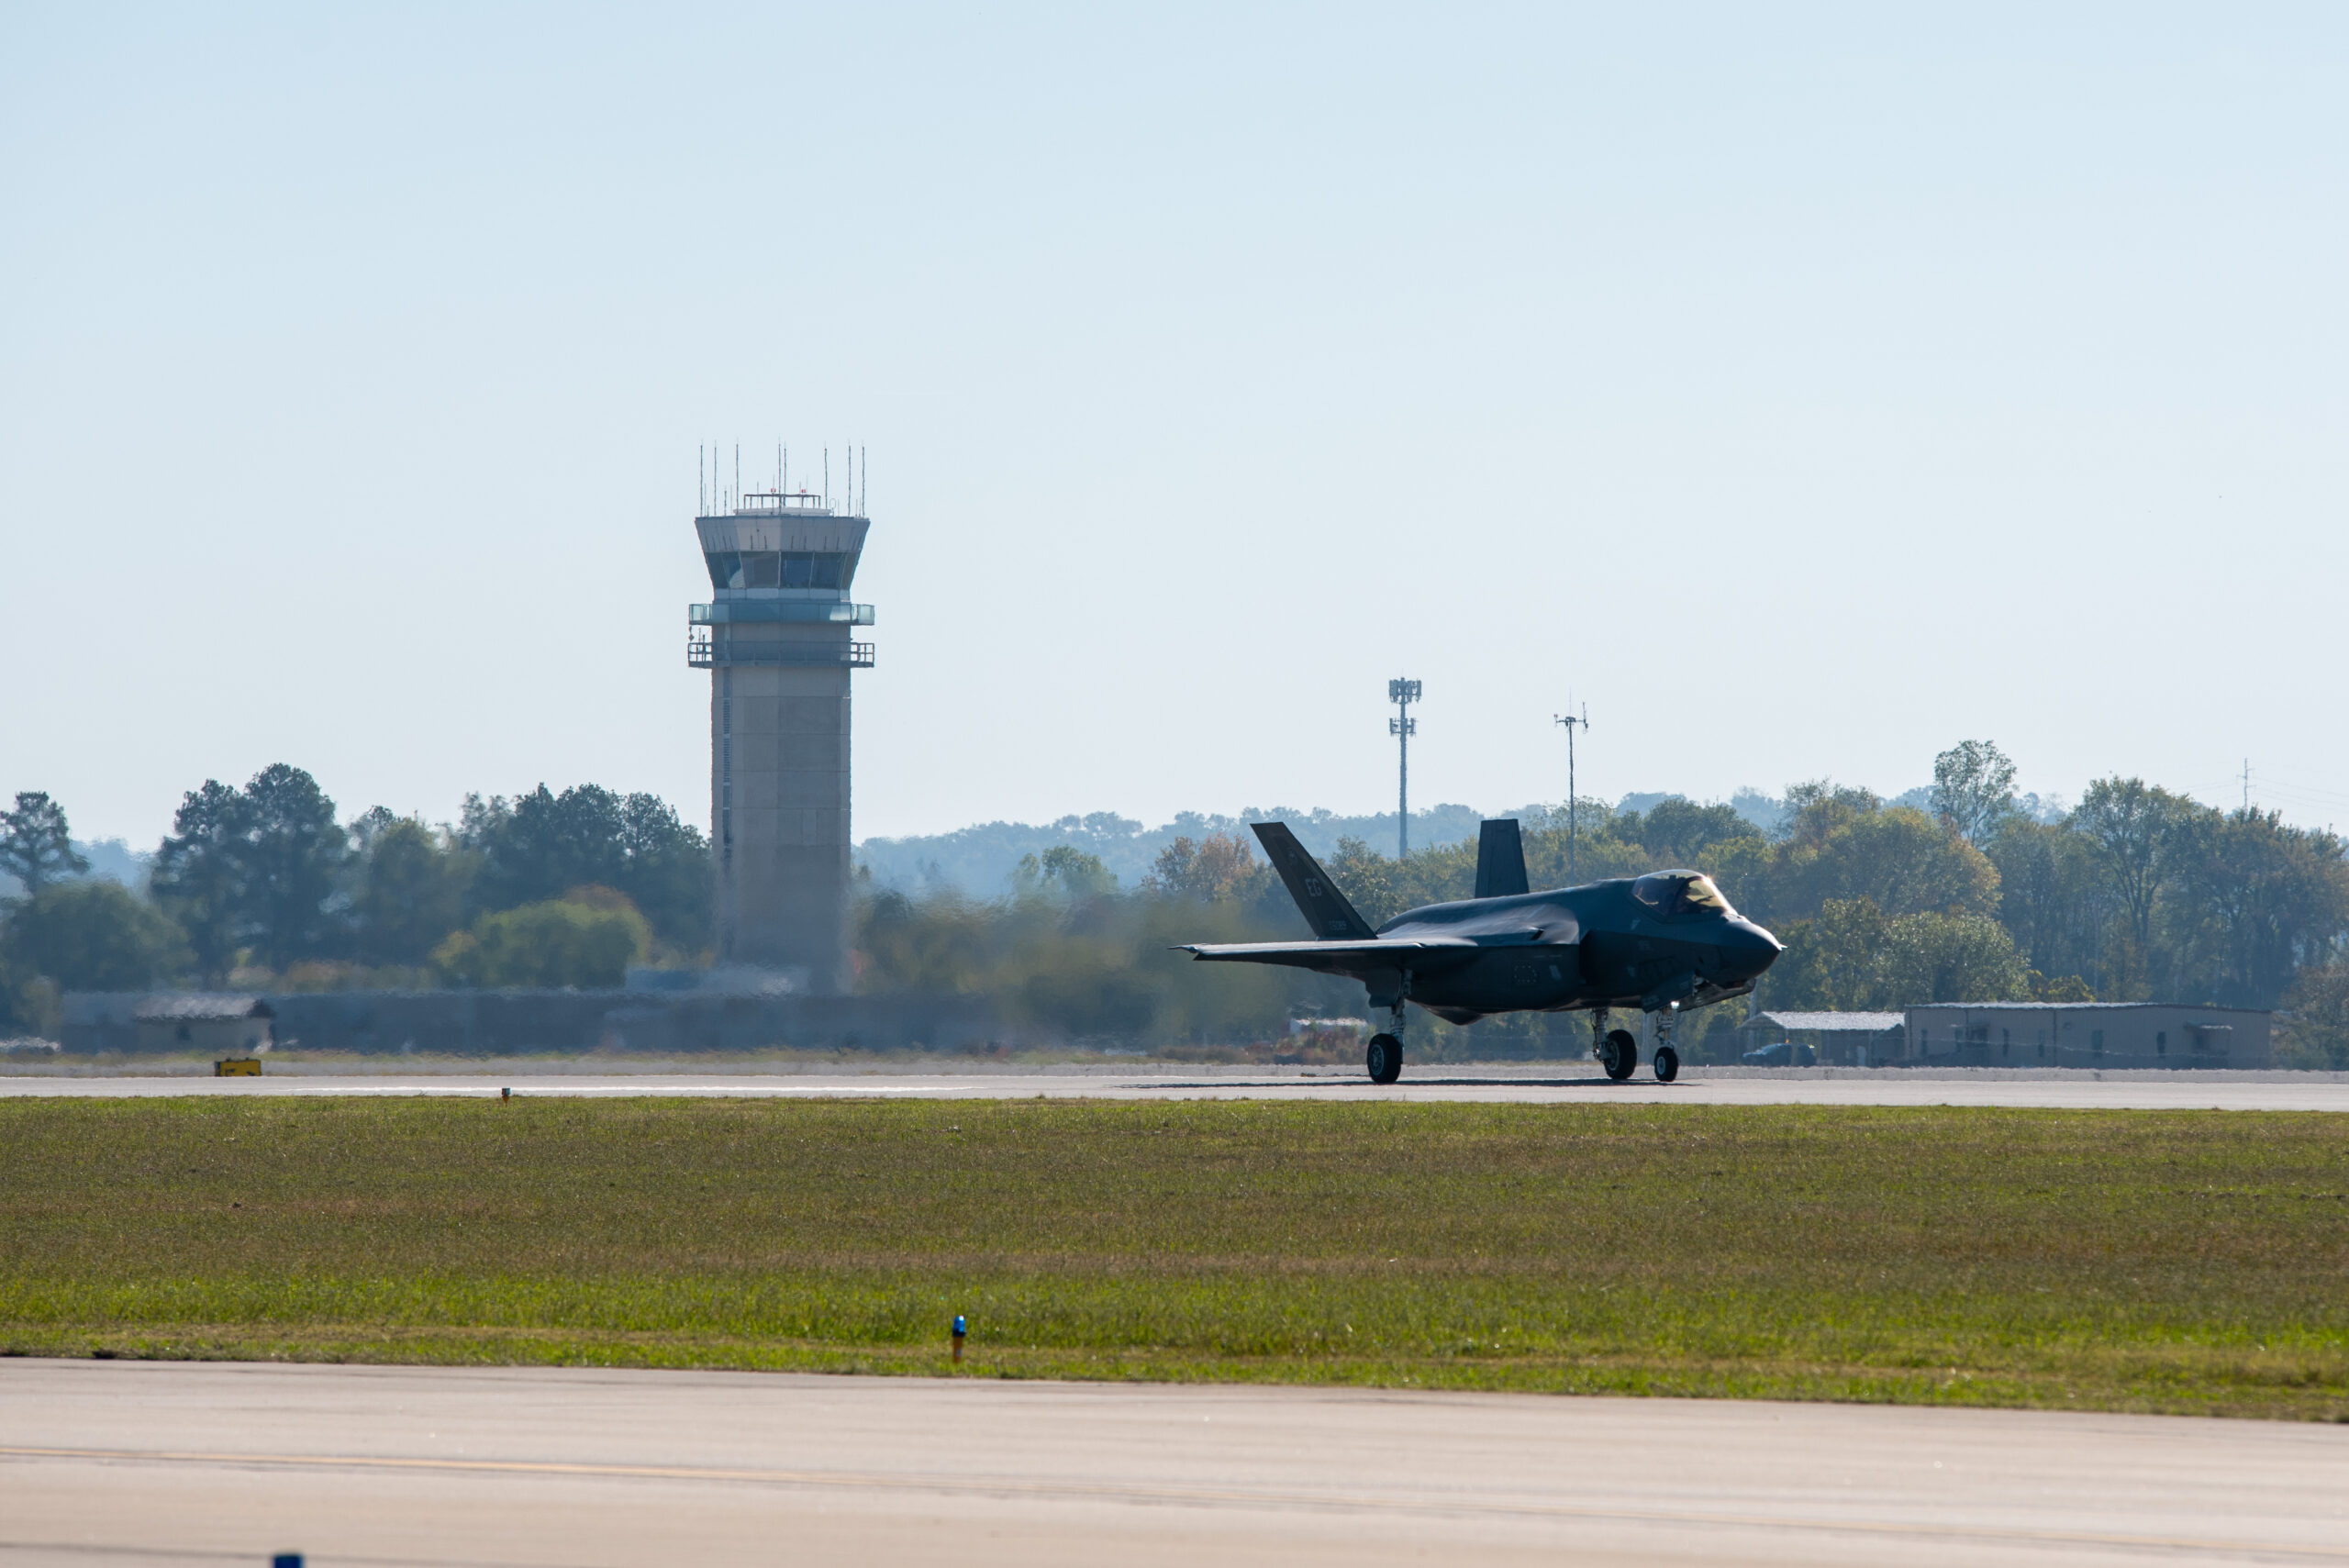 An F-35A Lightning II lands at Ebbing Air National Guard Base as part of a two-ship training event between Ebbing and Eglin Air Force Base on October 17, 2023. The pilots, Col. Charles Schuck, 33rd Operations Group Commander, and Lt. Col. Alex “Tuna” Turner, 33rd Fighter Wing Ebbing Project Officer, flew from Eglin to Ebbing Air National Guard Base to hone skills in support of Agile Combat Employment (ACE), a key operating concept for the U.S. Air Force in an increasingly contested global environment. (U.S. Air National Guard photo by Tech. Sgt. Christopher Sherlock)